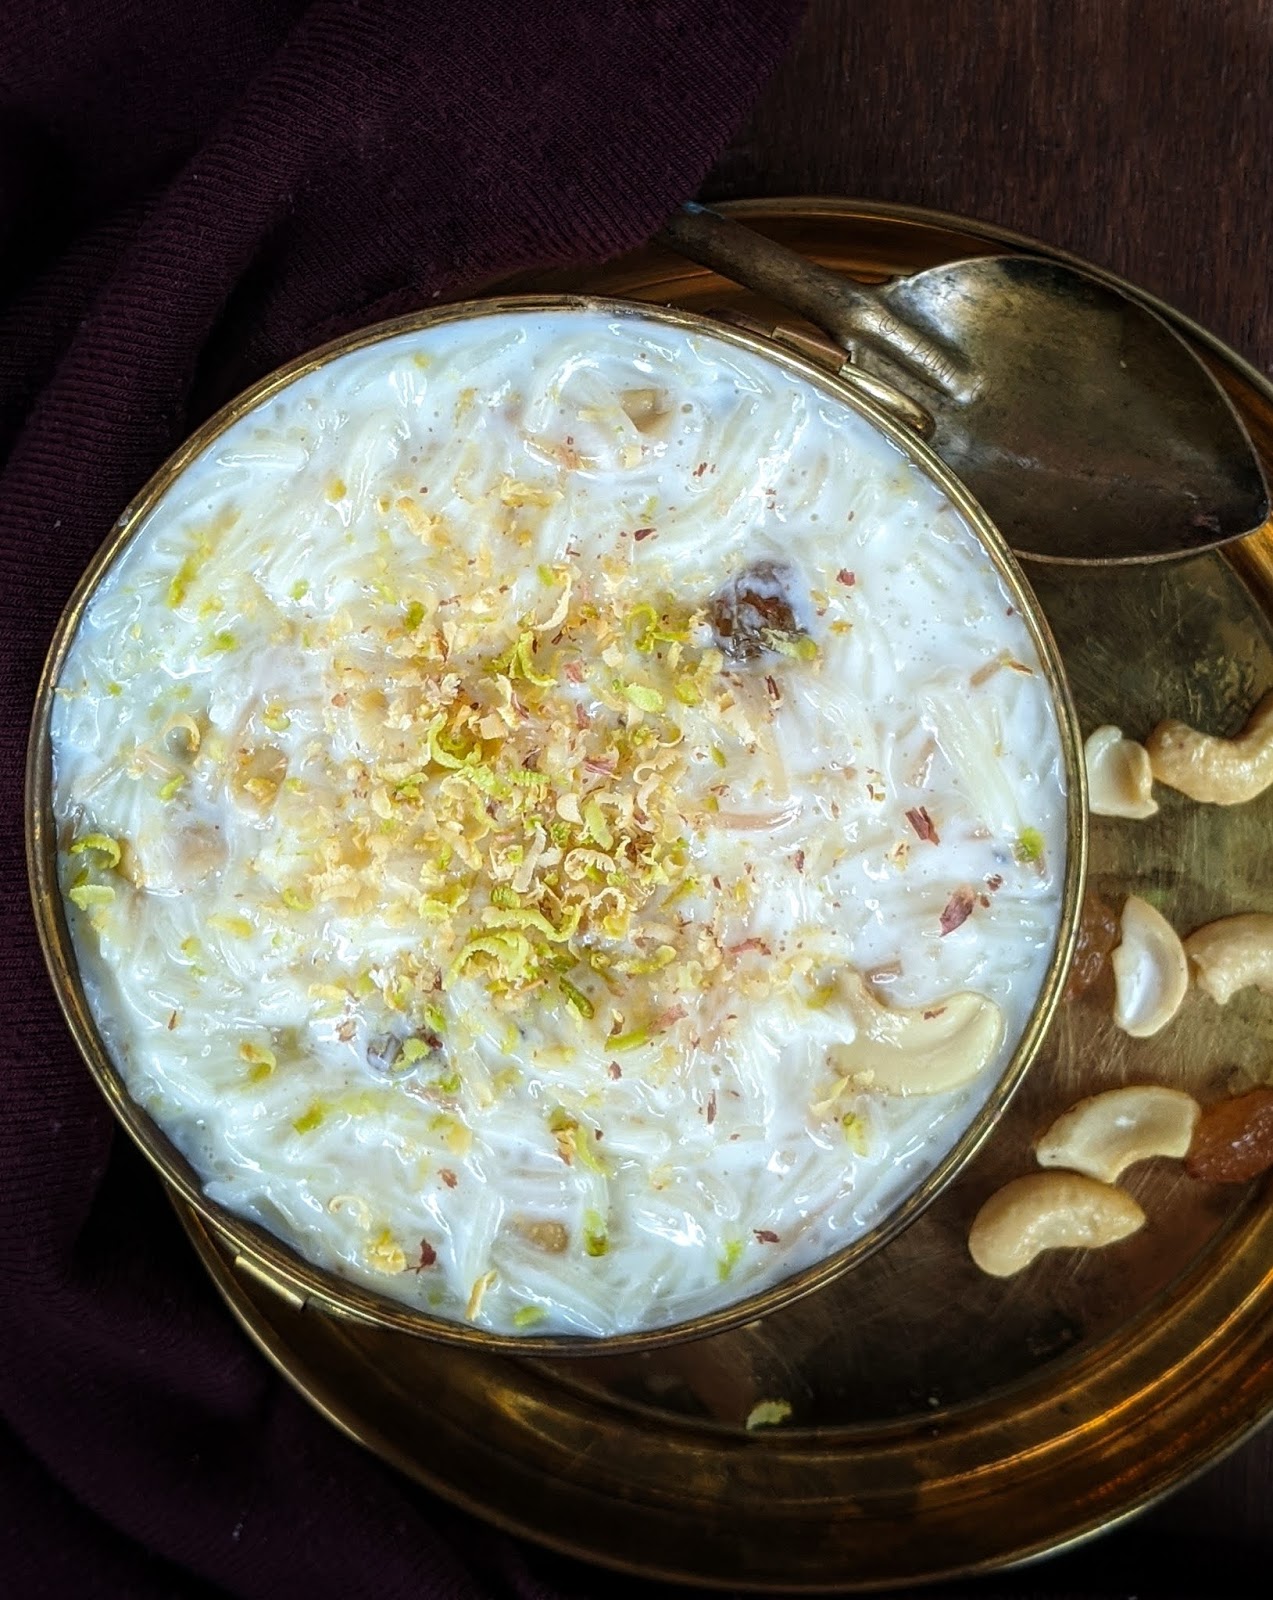 Bowl Of Food With Ash: Vermicelli Kheer Recipe |How To Make Seviyan ...